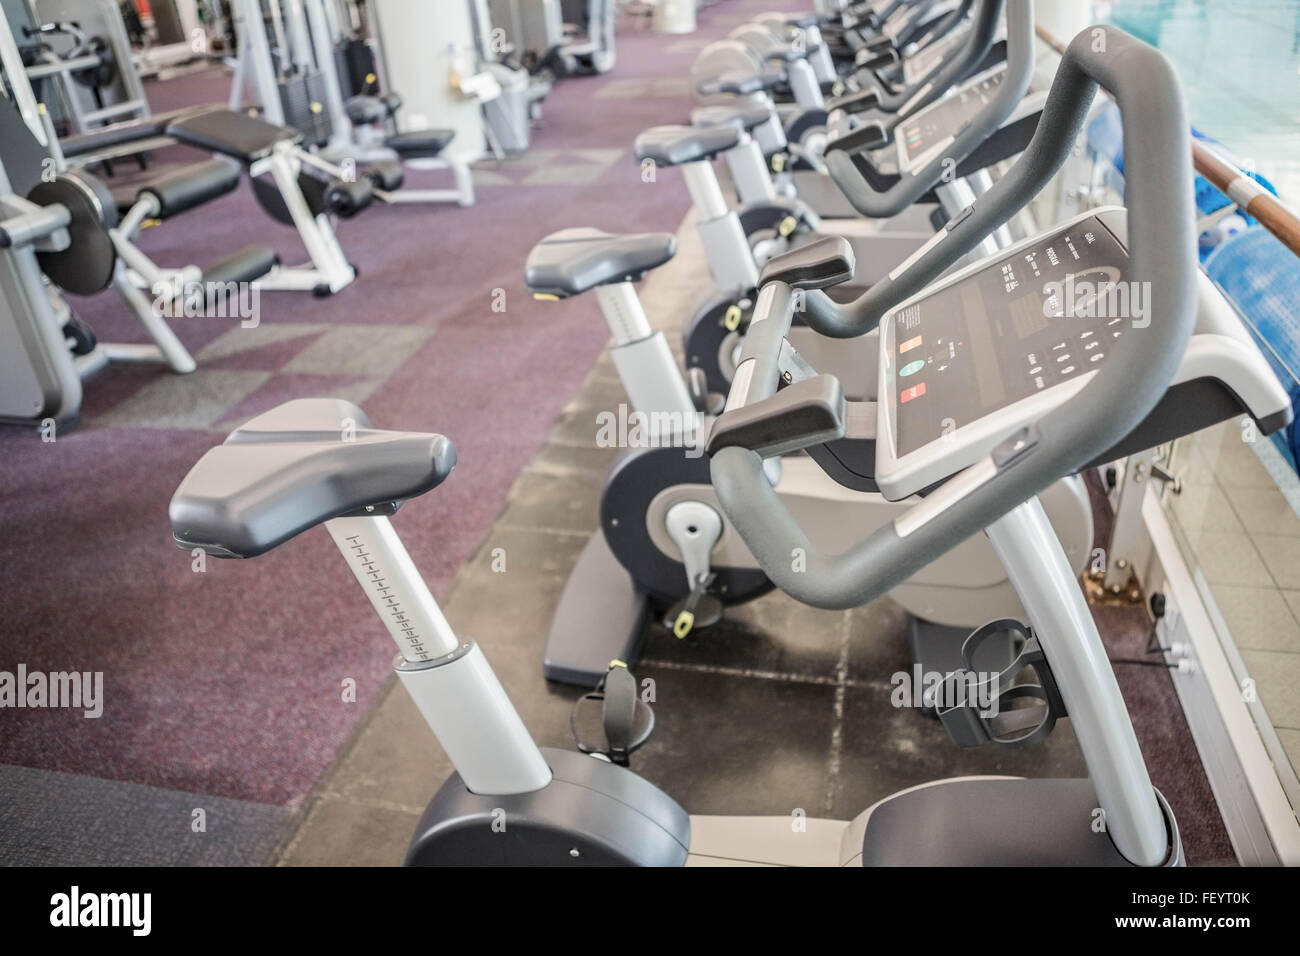 Gym with no people Stock Photo